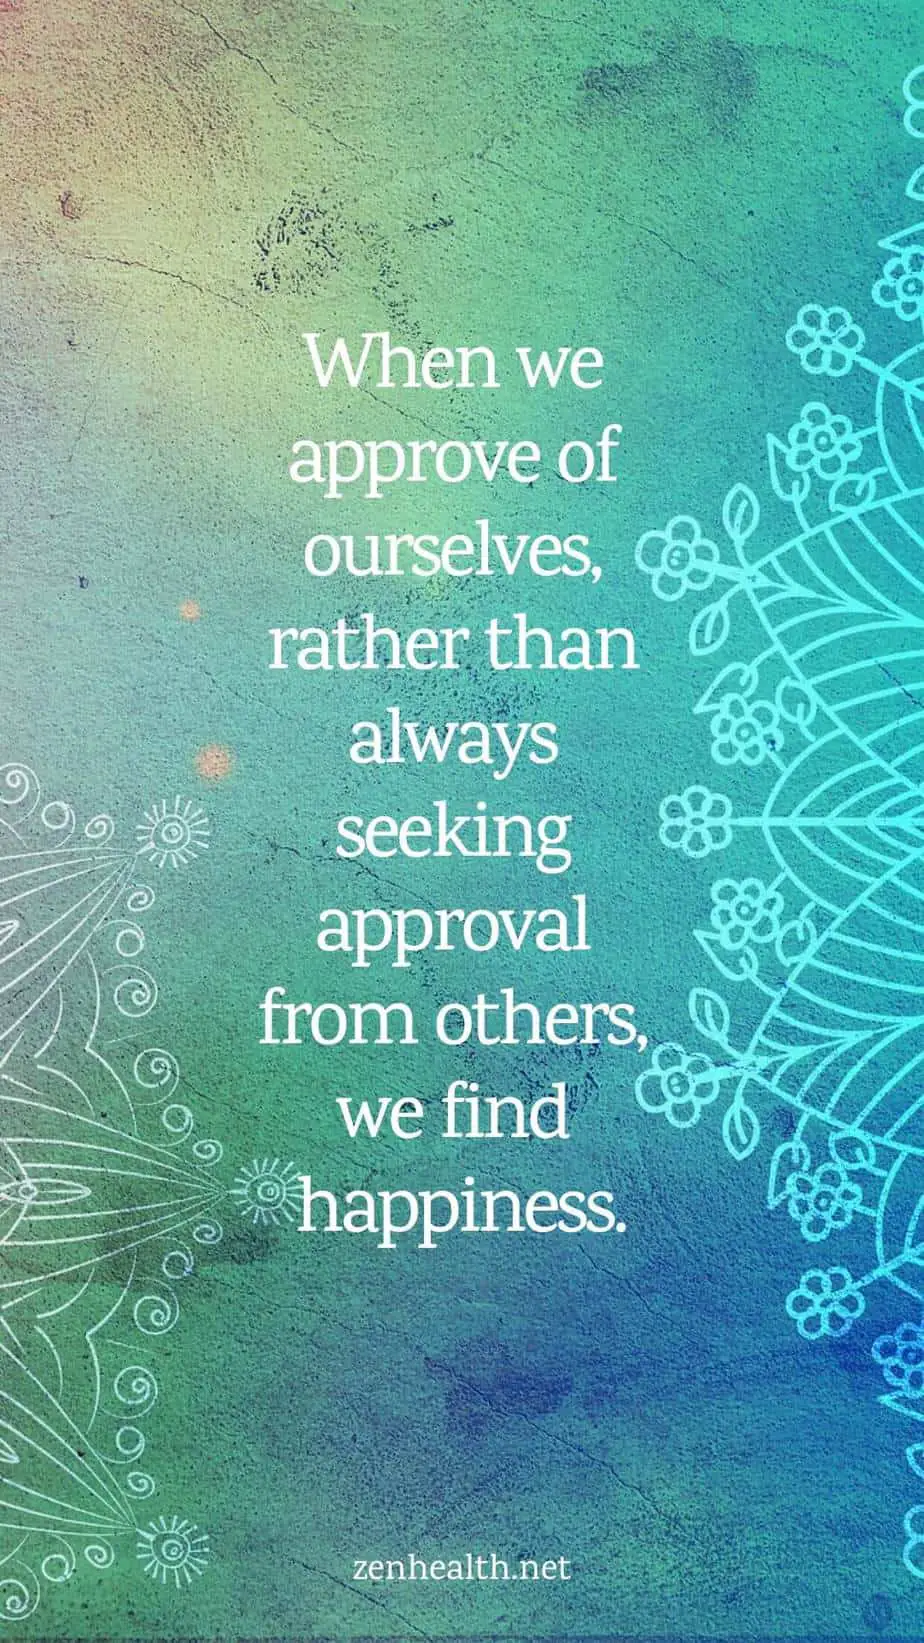 Happiness quotes: When we approve of ourselves, rather than always seeking approval from others, we find happiness.